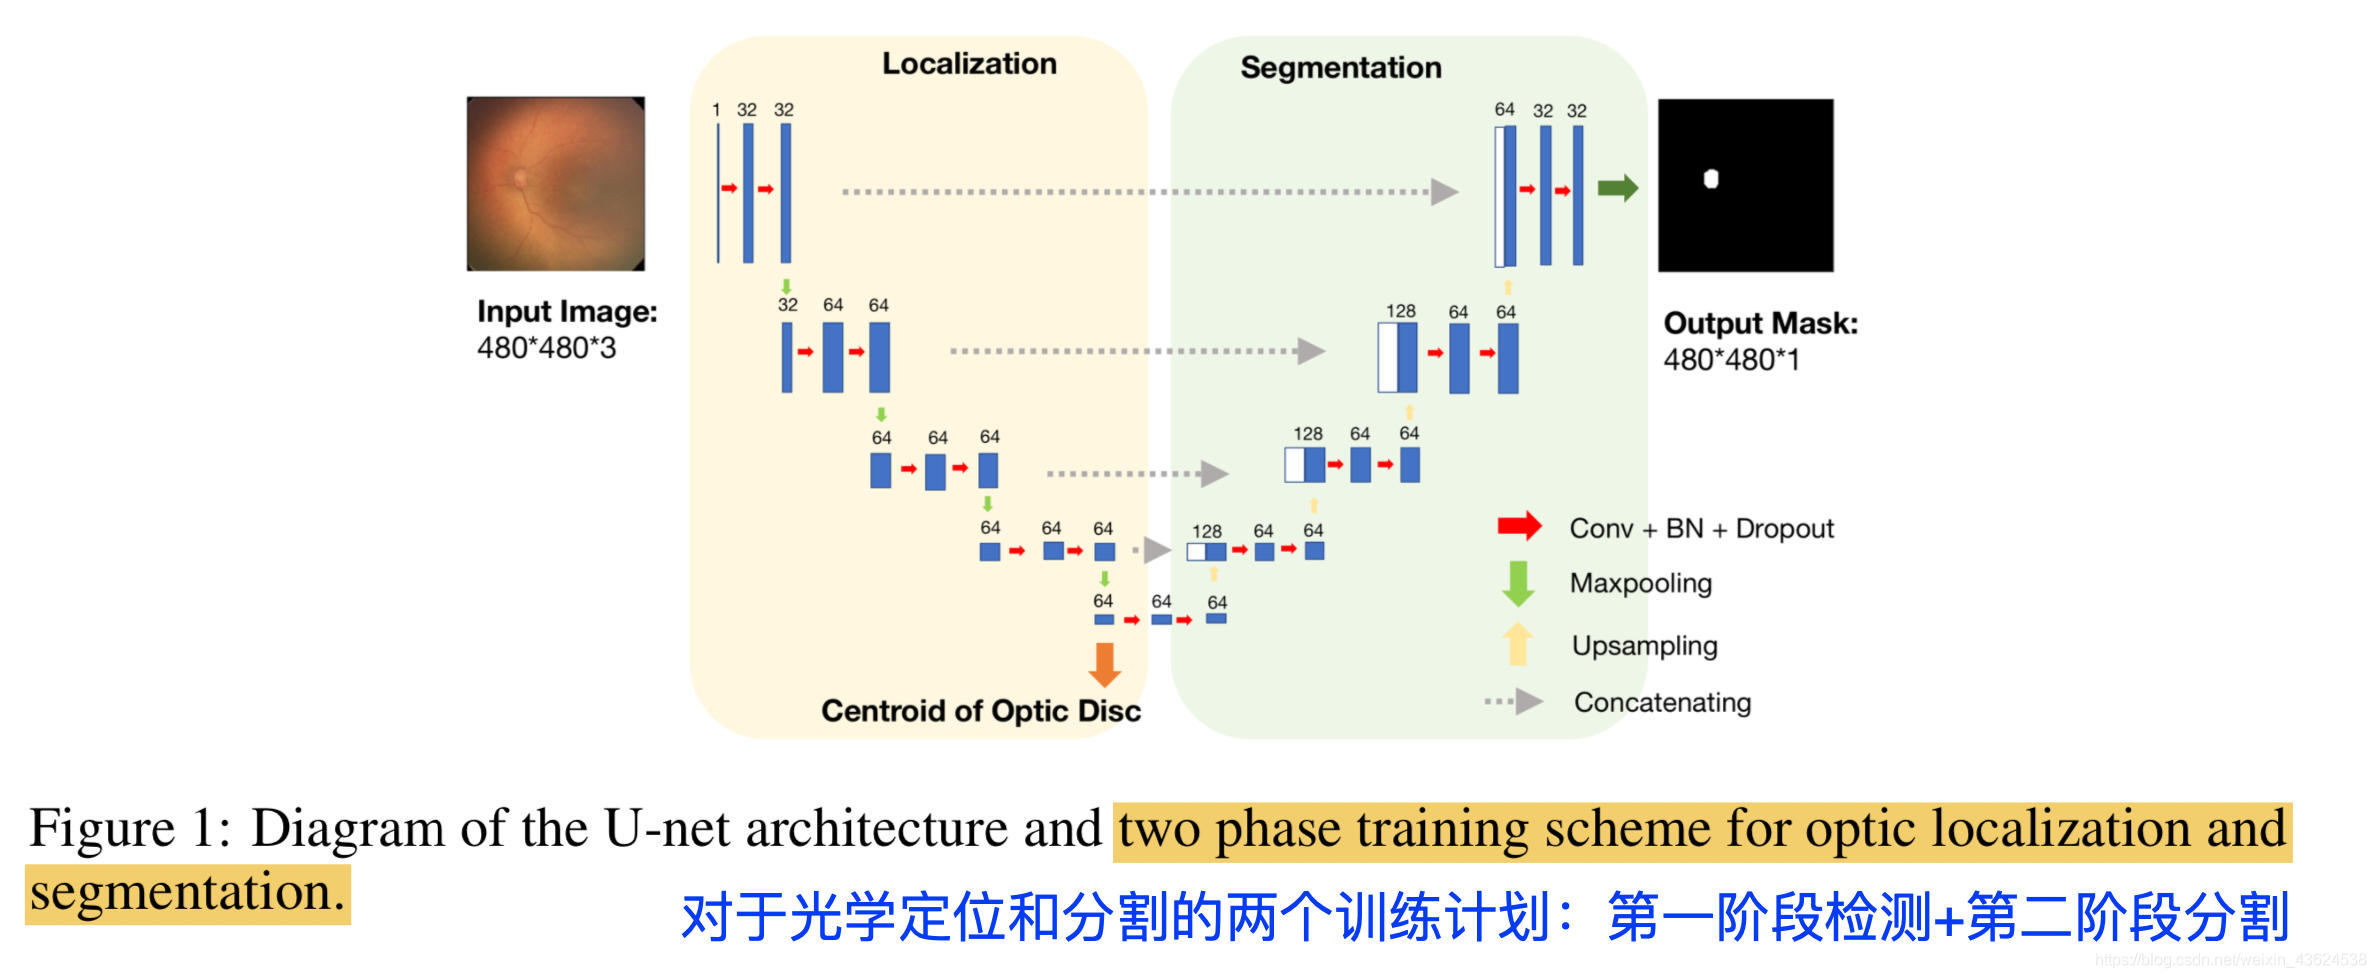 【Transfer Learning】Deep feature transfer between localization and segmentation tasks